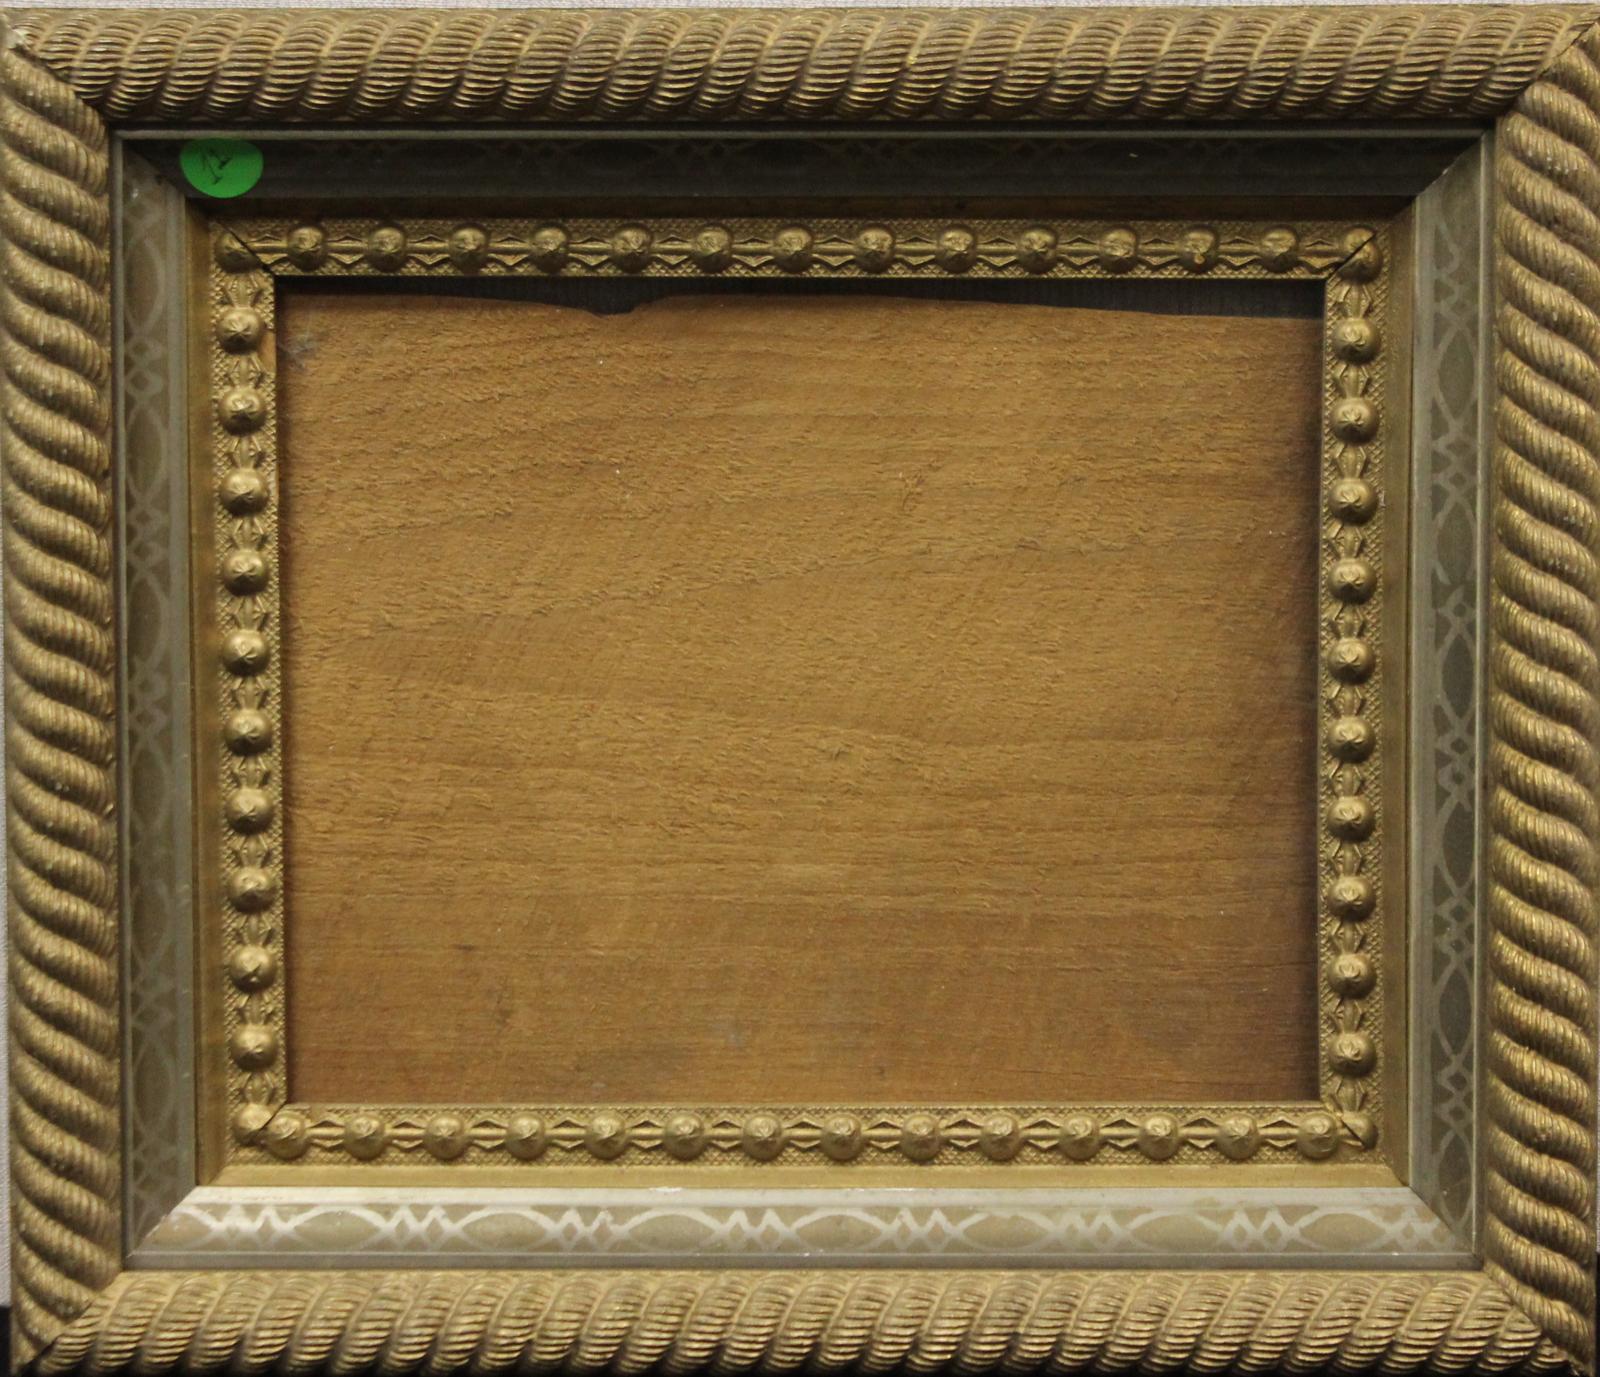 Ornate Gilt Picture Frame - Art by Unknown